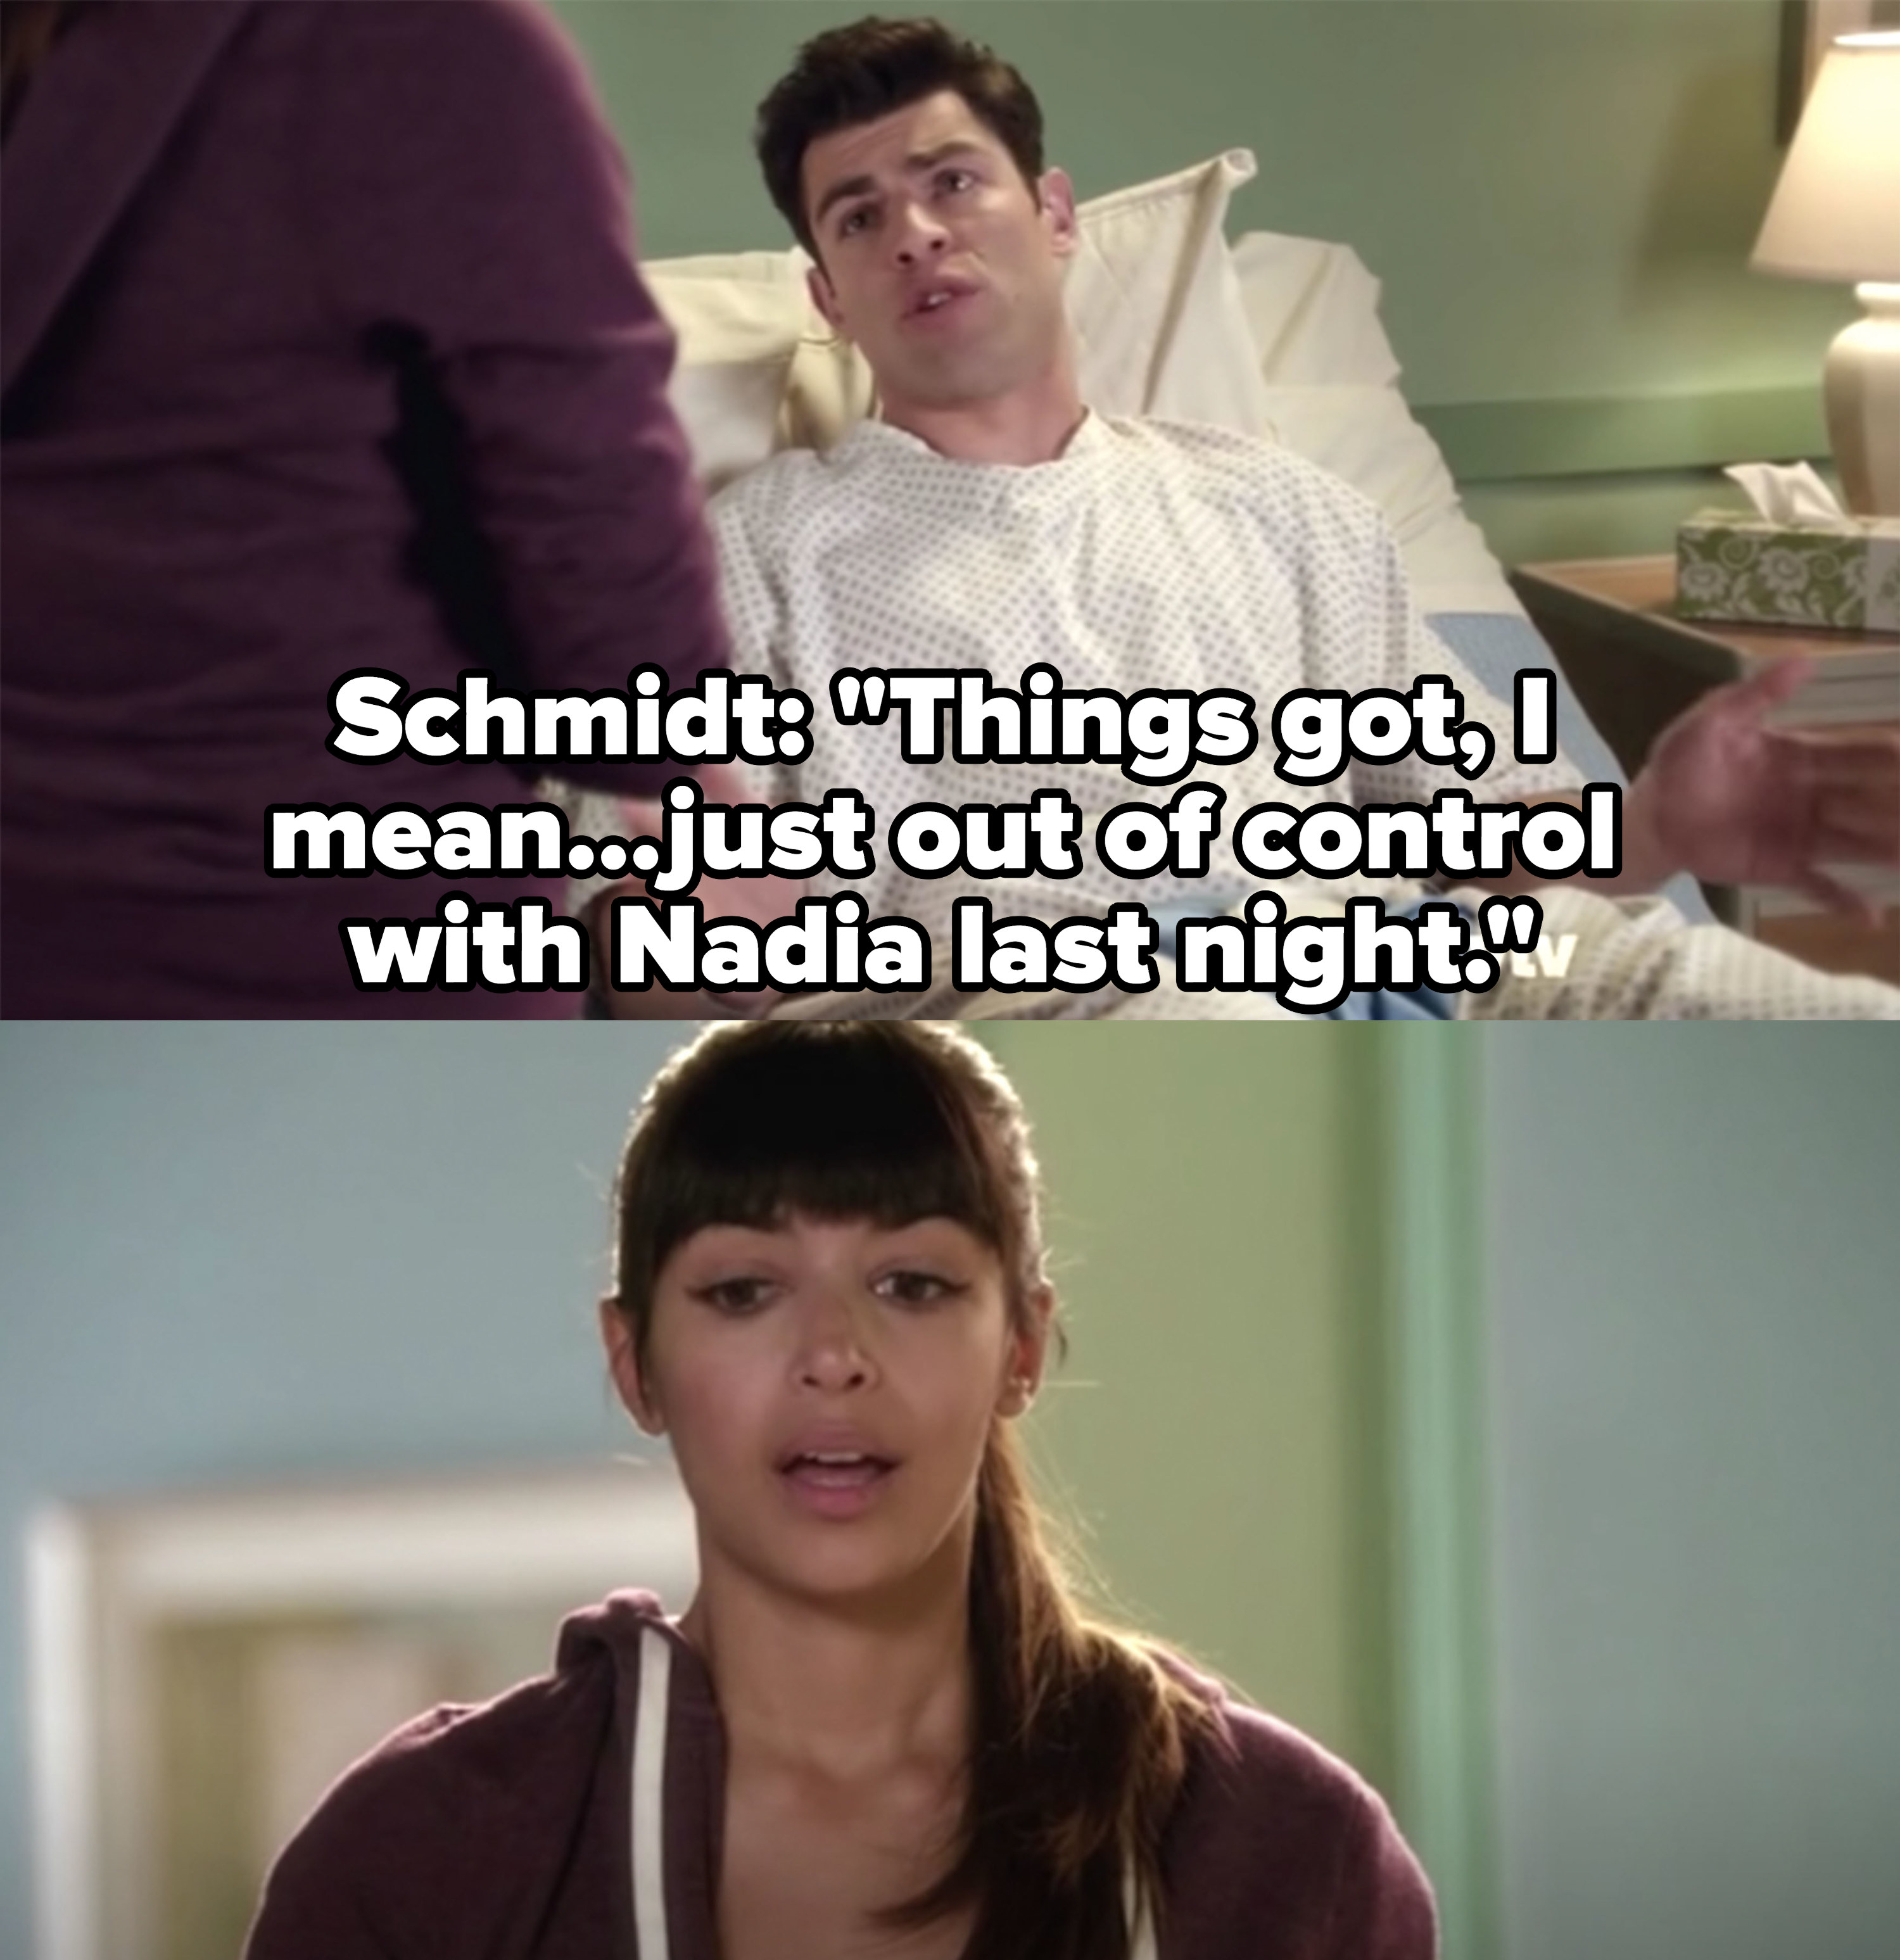 Schmidt tells Cece things got &quot;out of control with Nadia last night&quot;